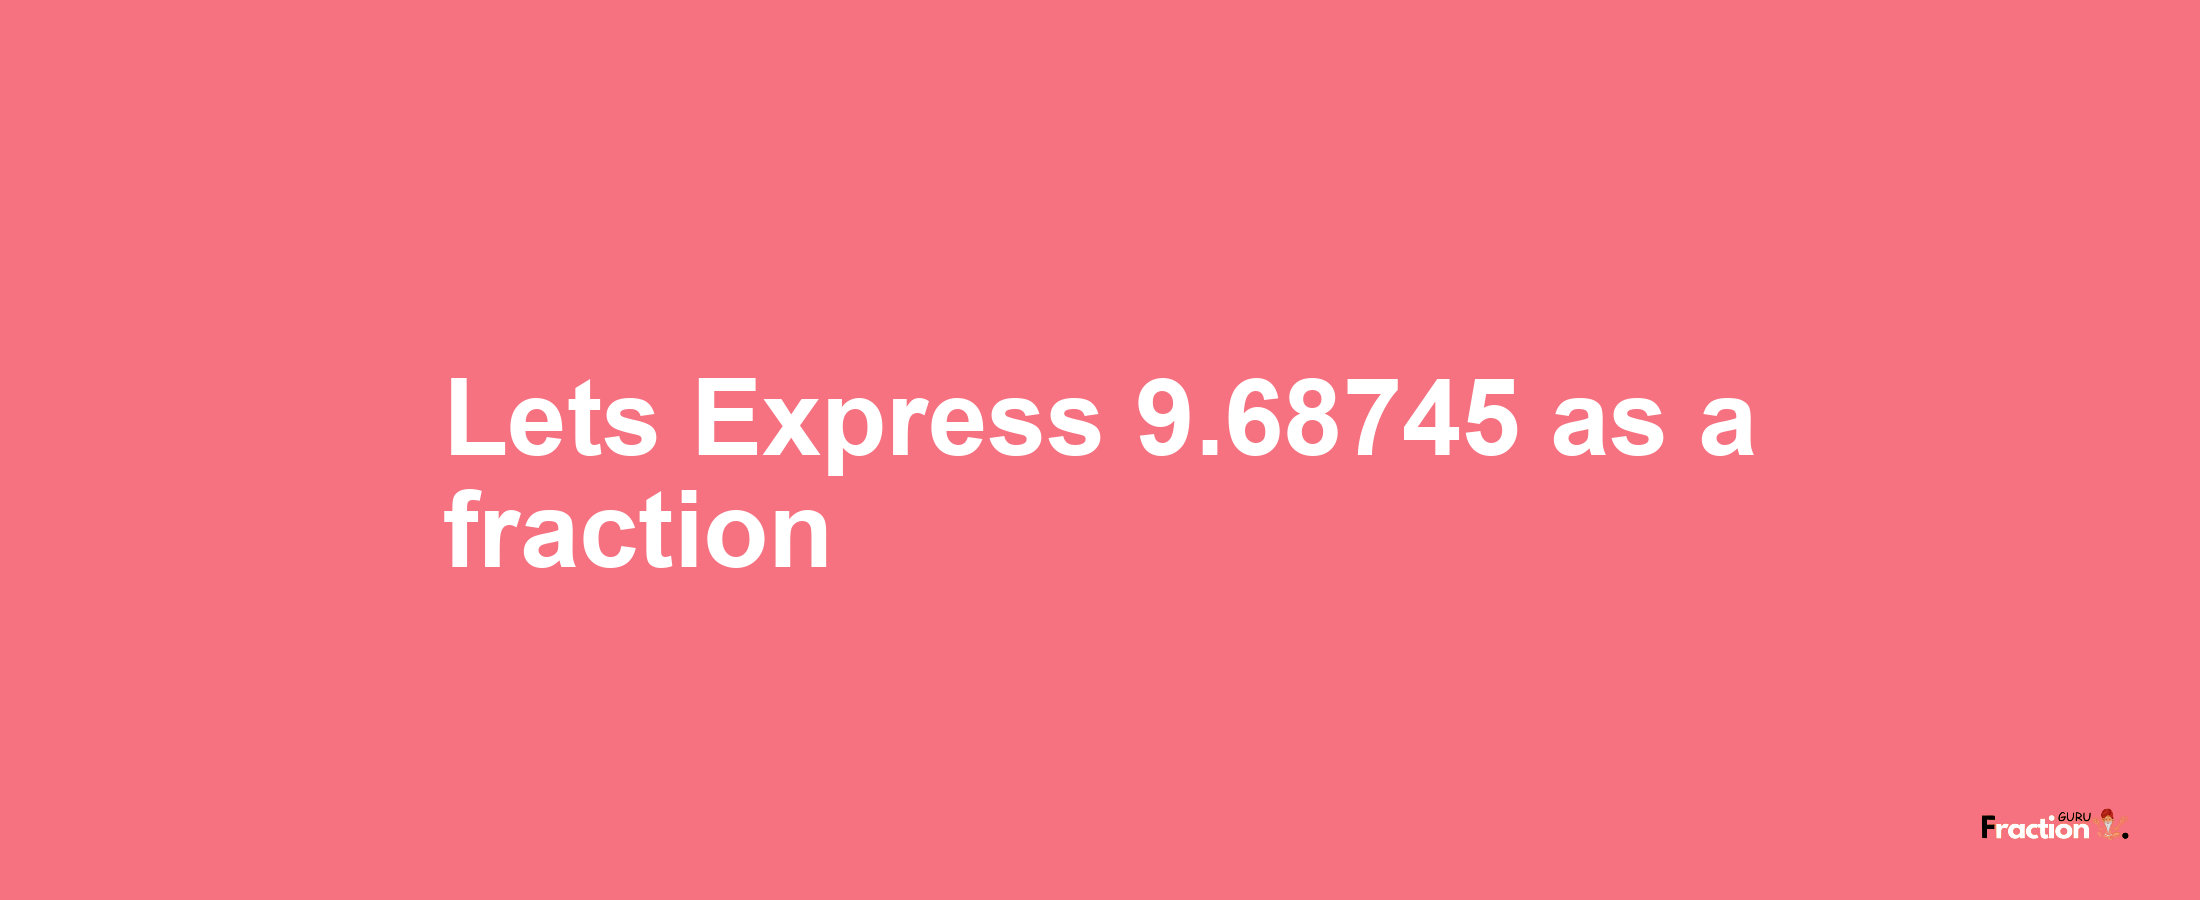 Lets Express 9.68745 as afraction